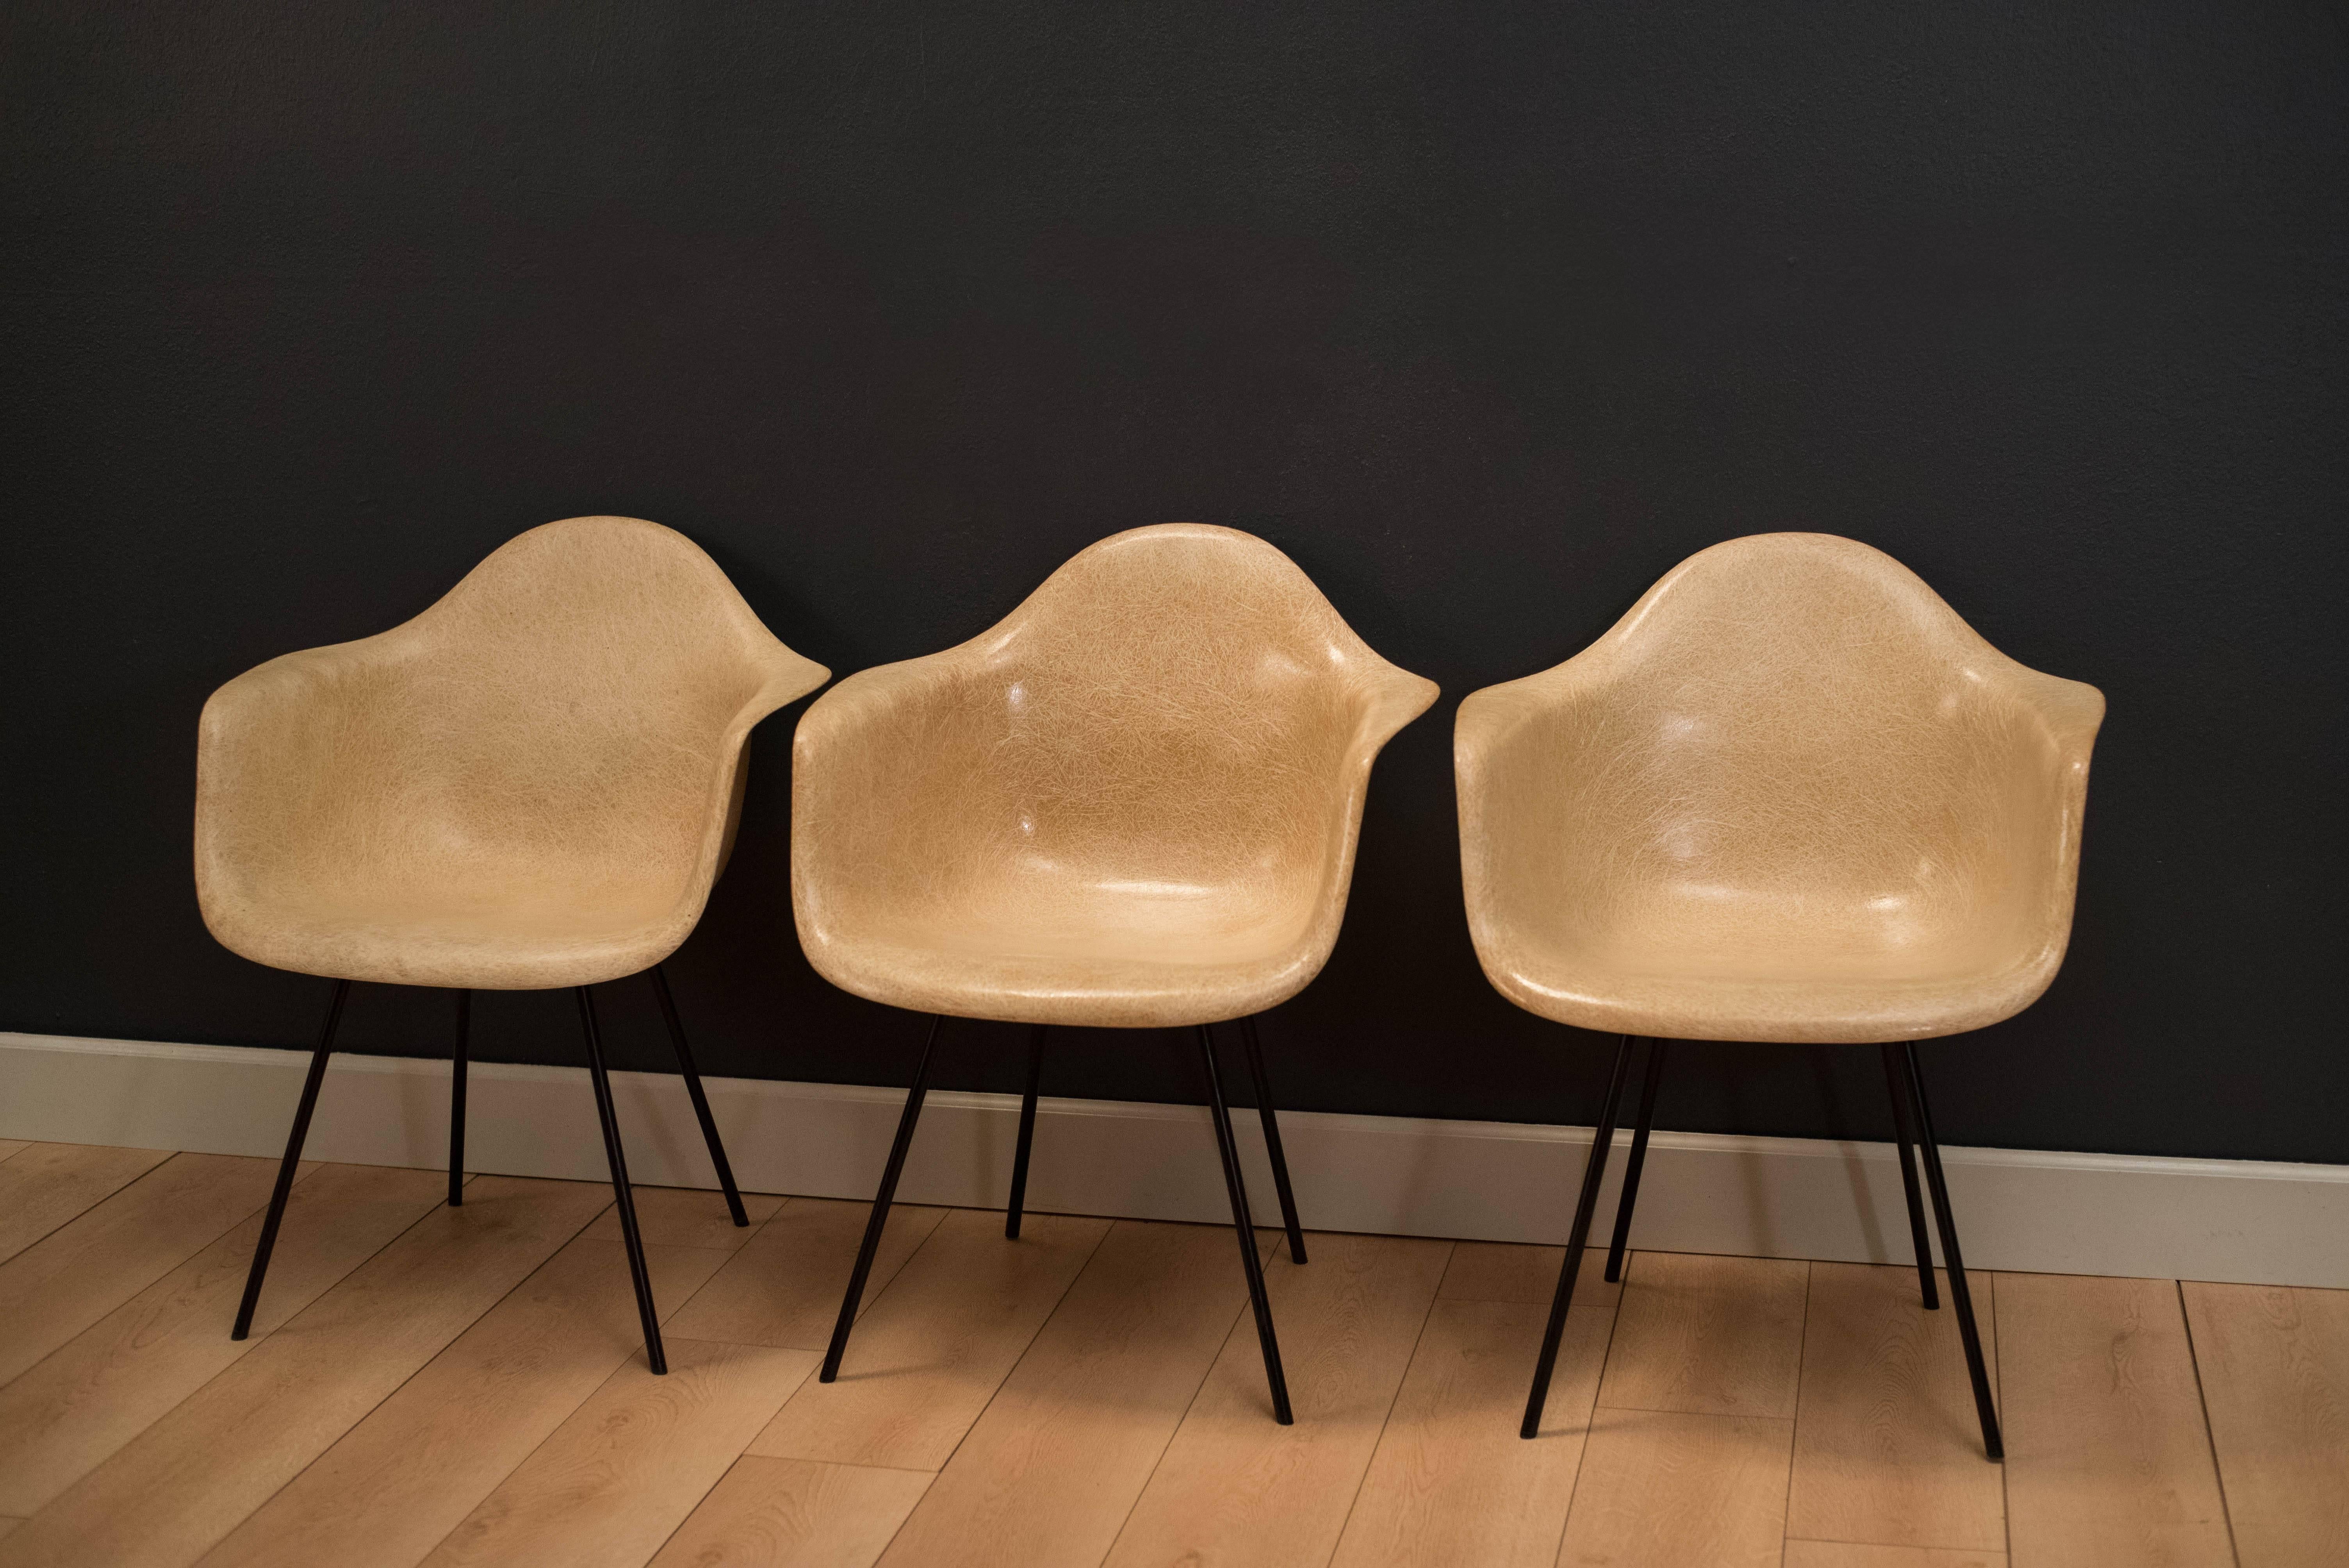 Iconic design by Ray and Charles Eames, these second generation parchment colored shell chairs have large shock mounts and original black X bases. These earlier production pieces were manufactured by Zenith Plastics.